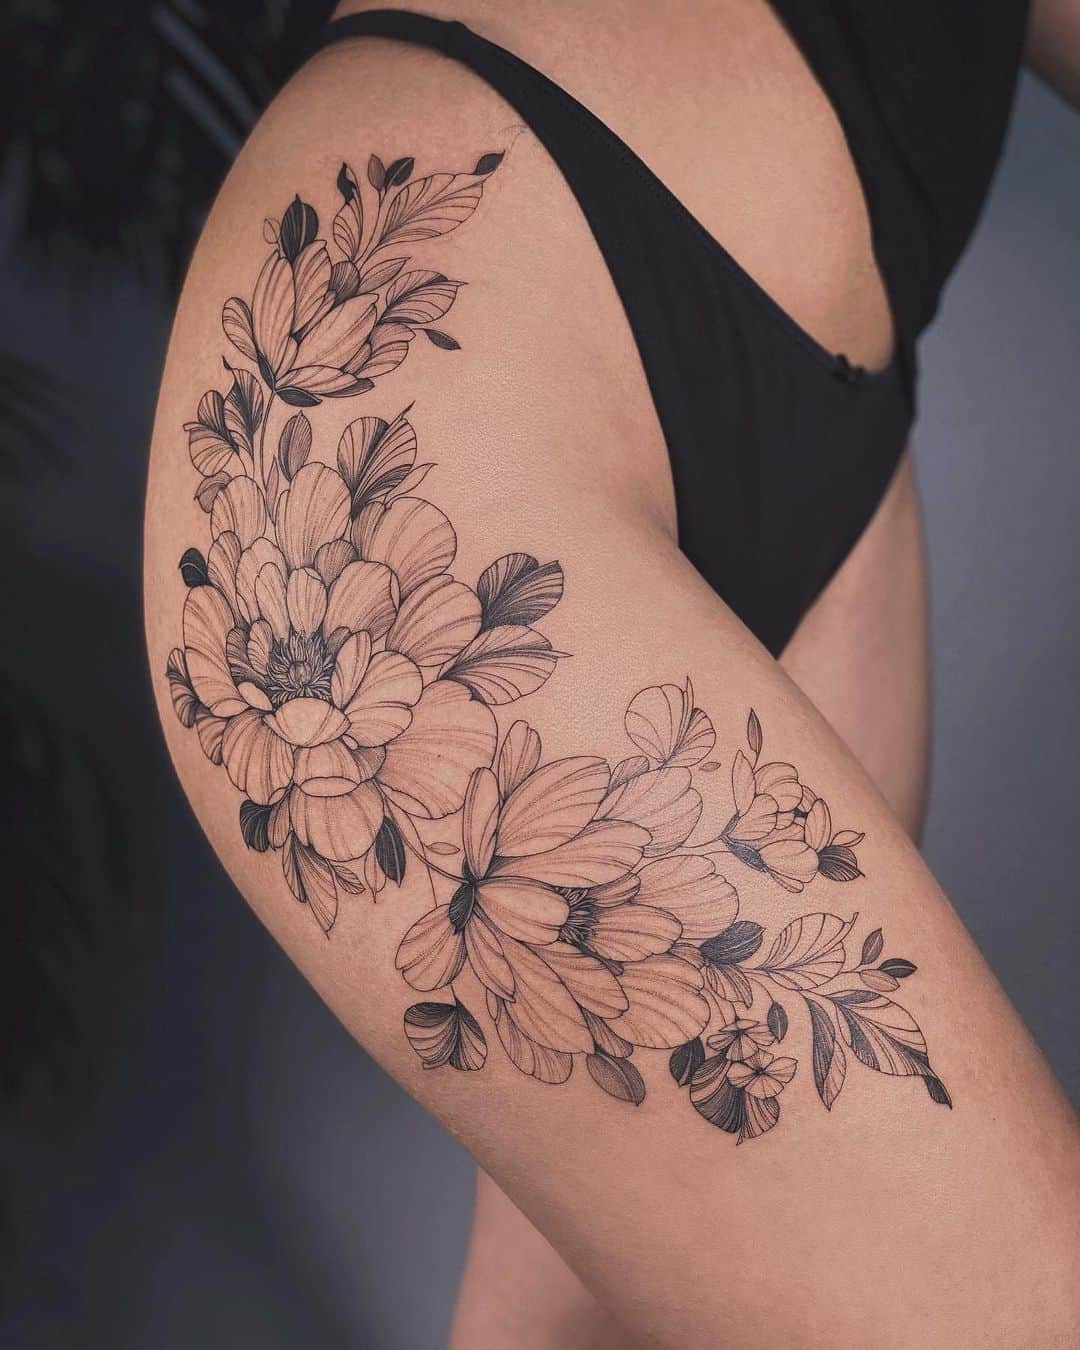 Peony Flower tattoo on thigh by crush.on .line